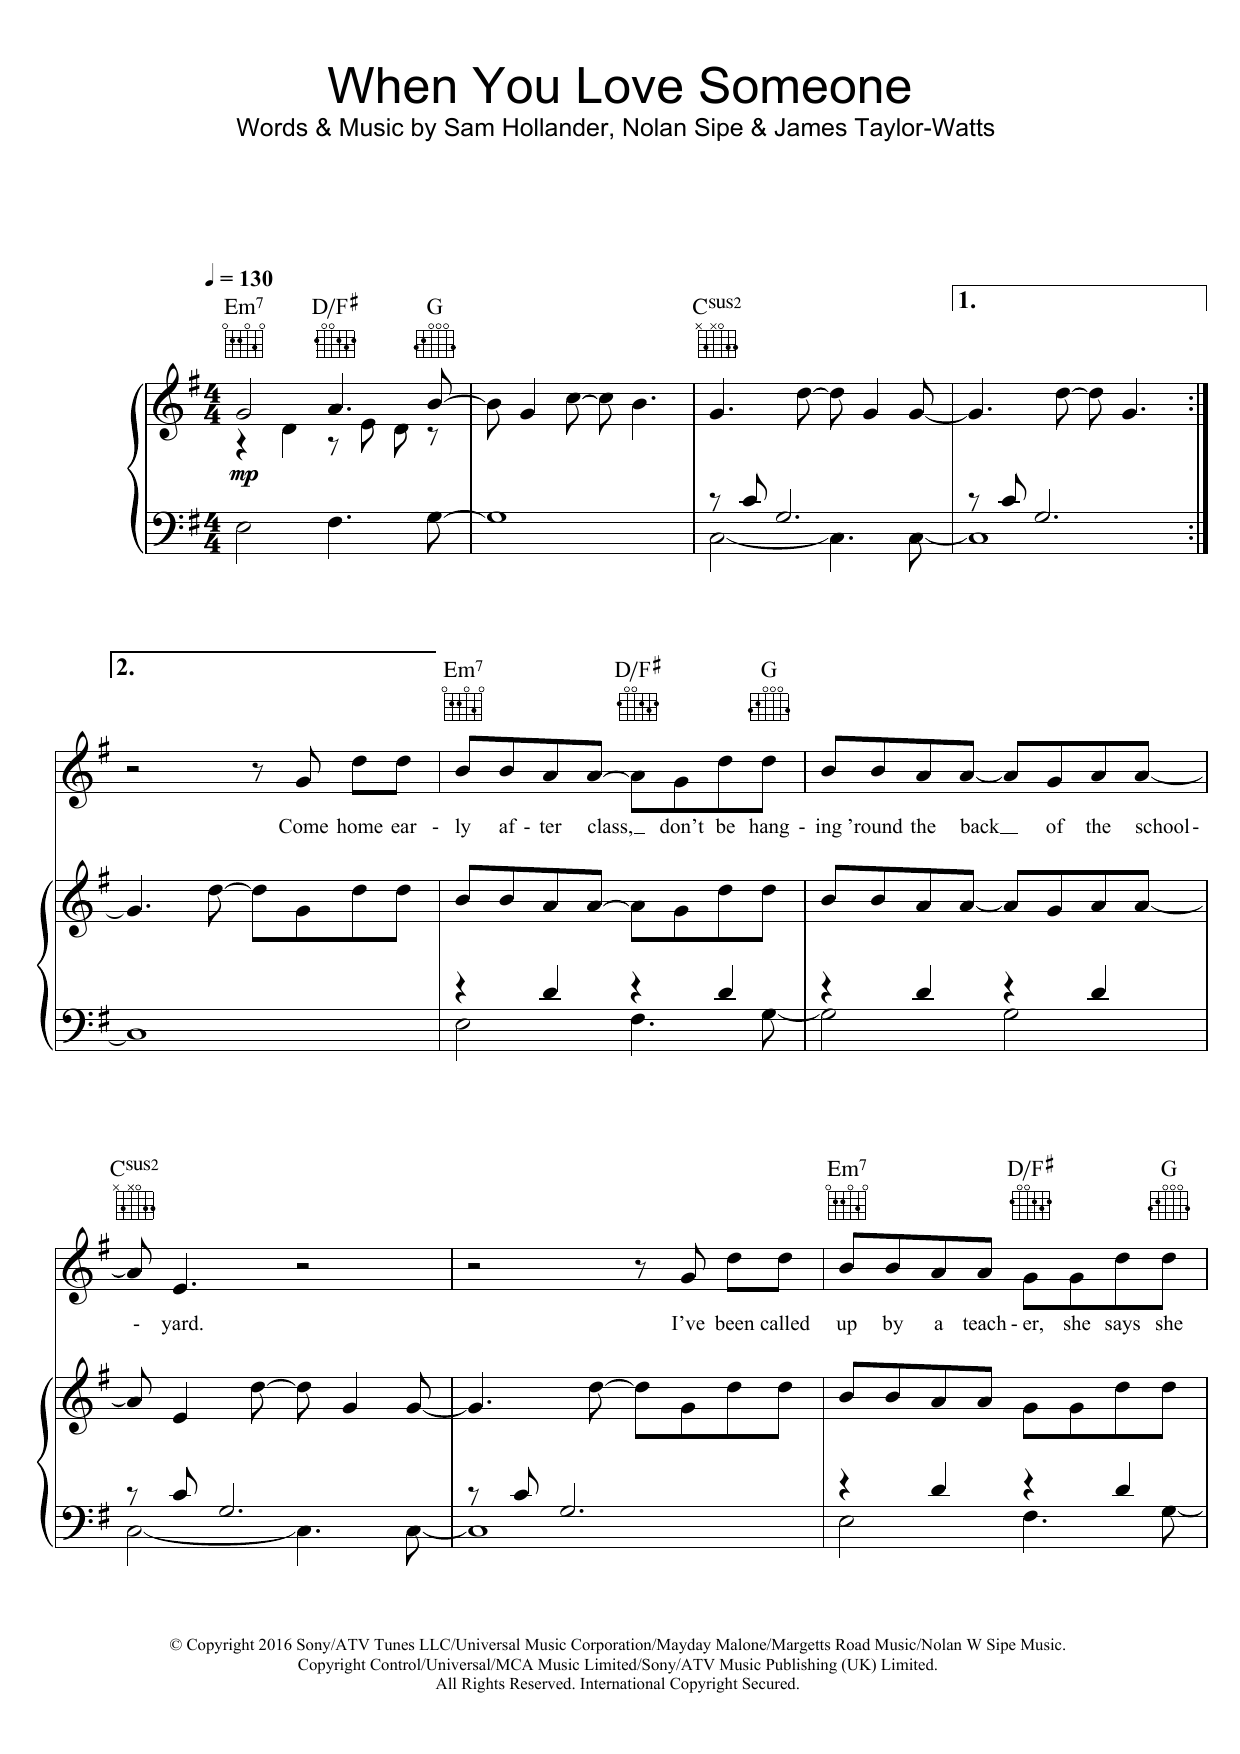 Download James TW When You Love Someone Sheet Music